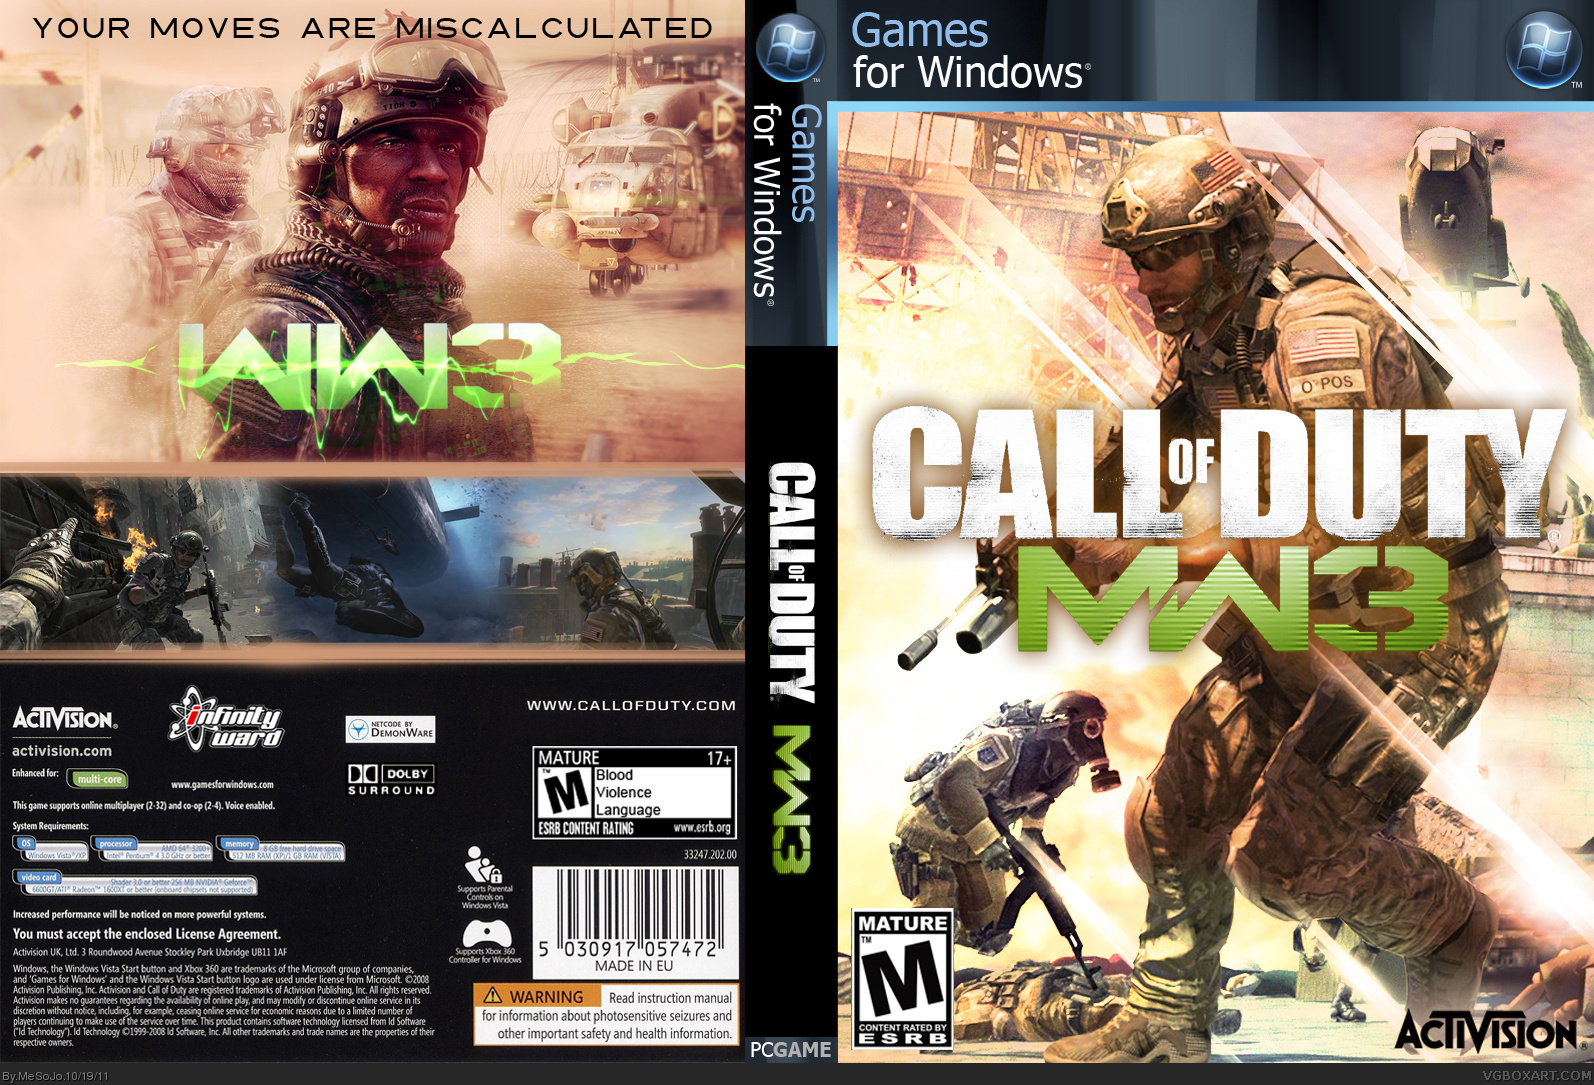 Диск игры call of duty. Call of Duty Modern Warfare 3 диск PC. Call of Duty mw3 диск. Call of Duty 4 Modern Warfare диск. Call of Duty 3 диск.